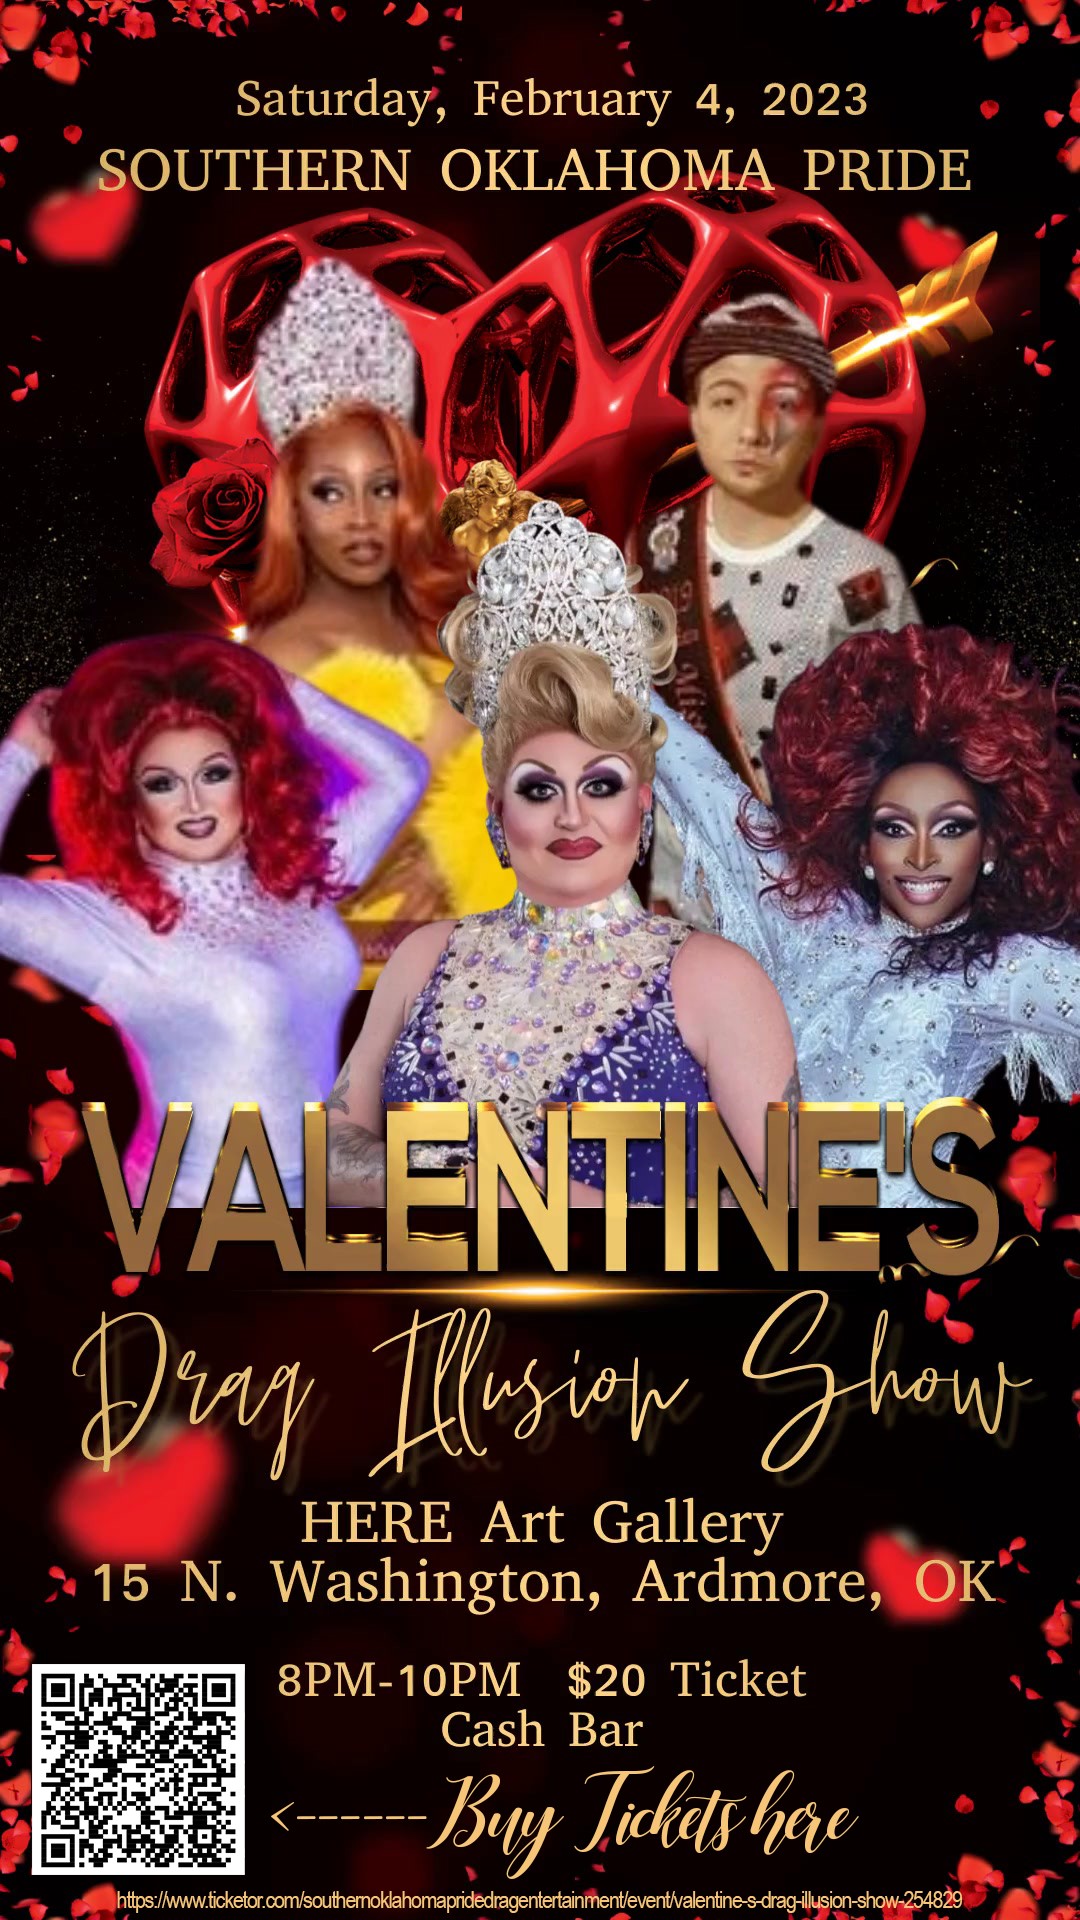 Valentine's Drag Illusion Show with Shantel Mandalay & Company; hosted by Southern Oklahoma Pride on feb. 04, 20:00@HERE Art Gallery - Compra entradas y obtén información enSouthern Oklahoma Pride Event, 